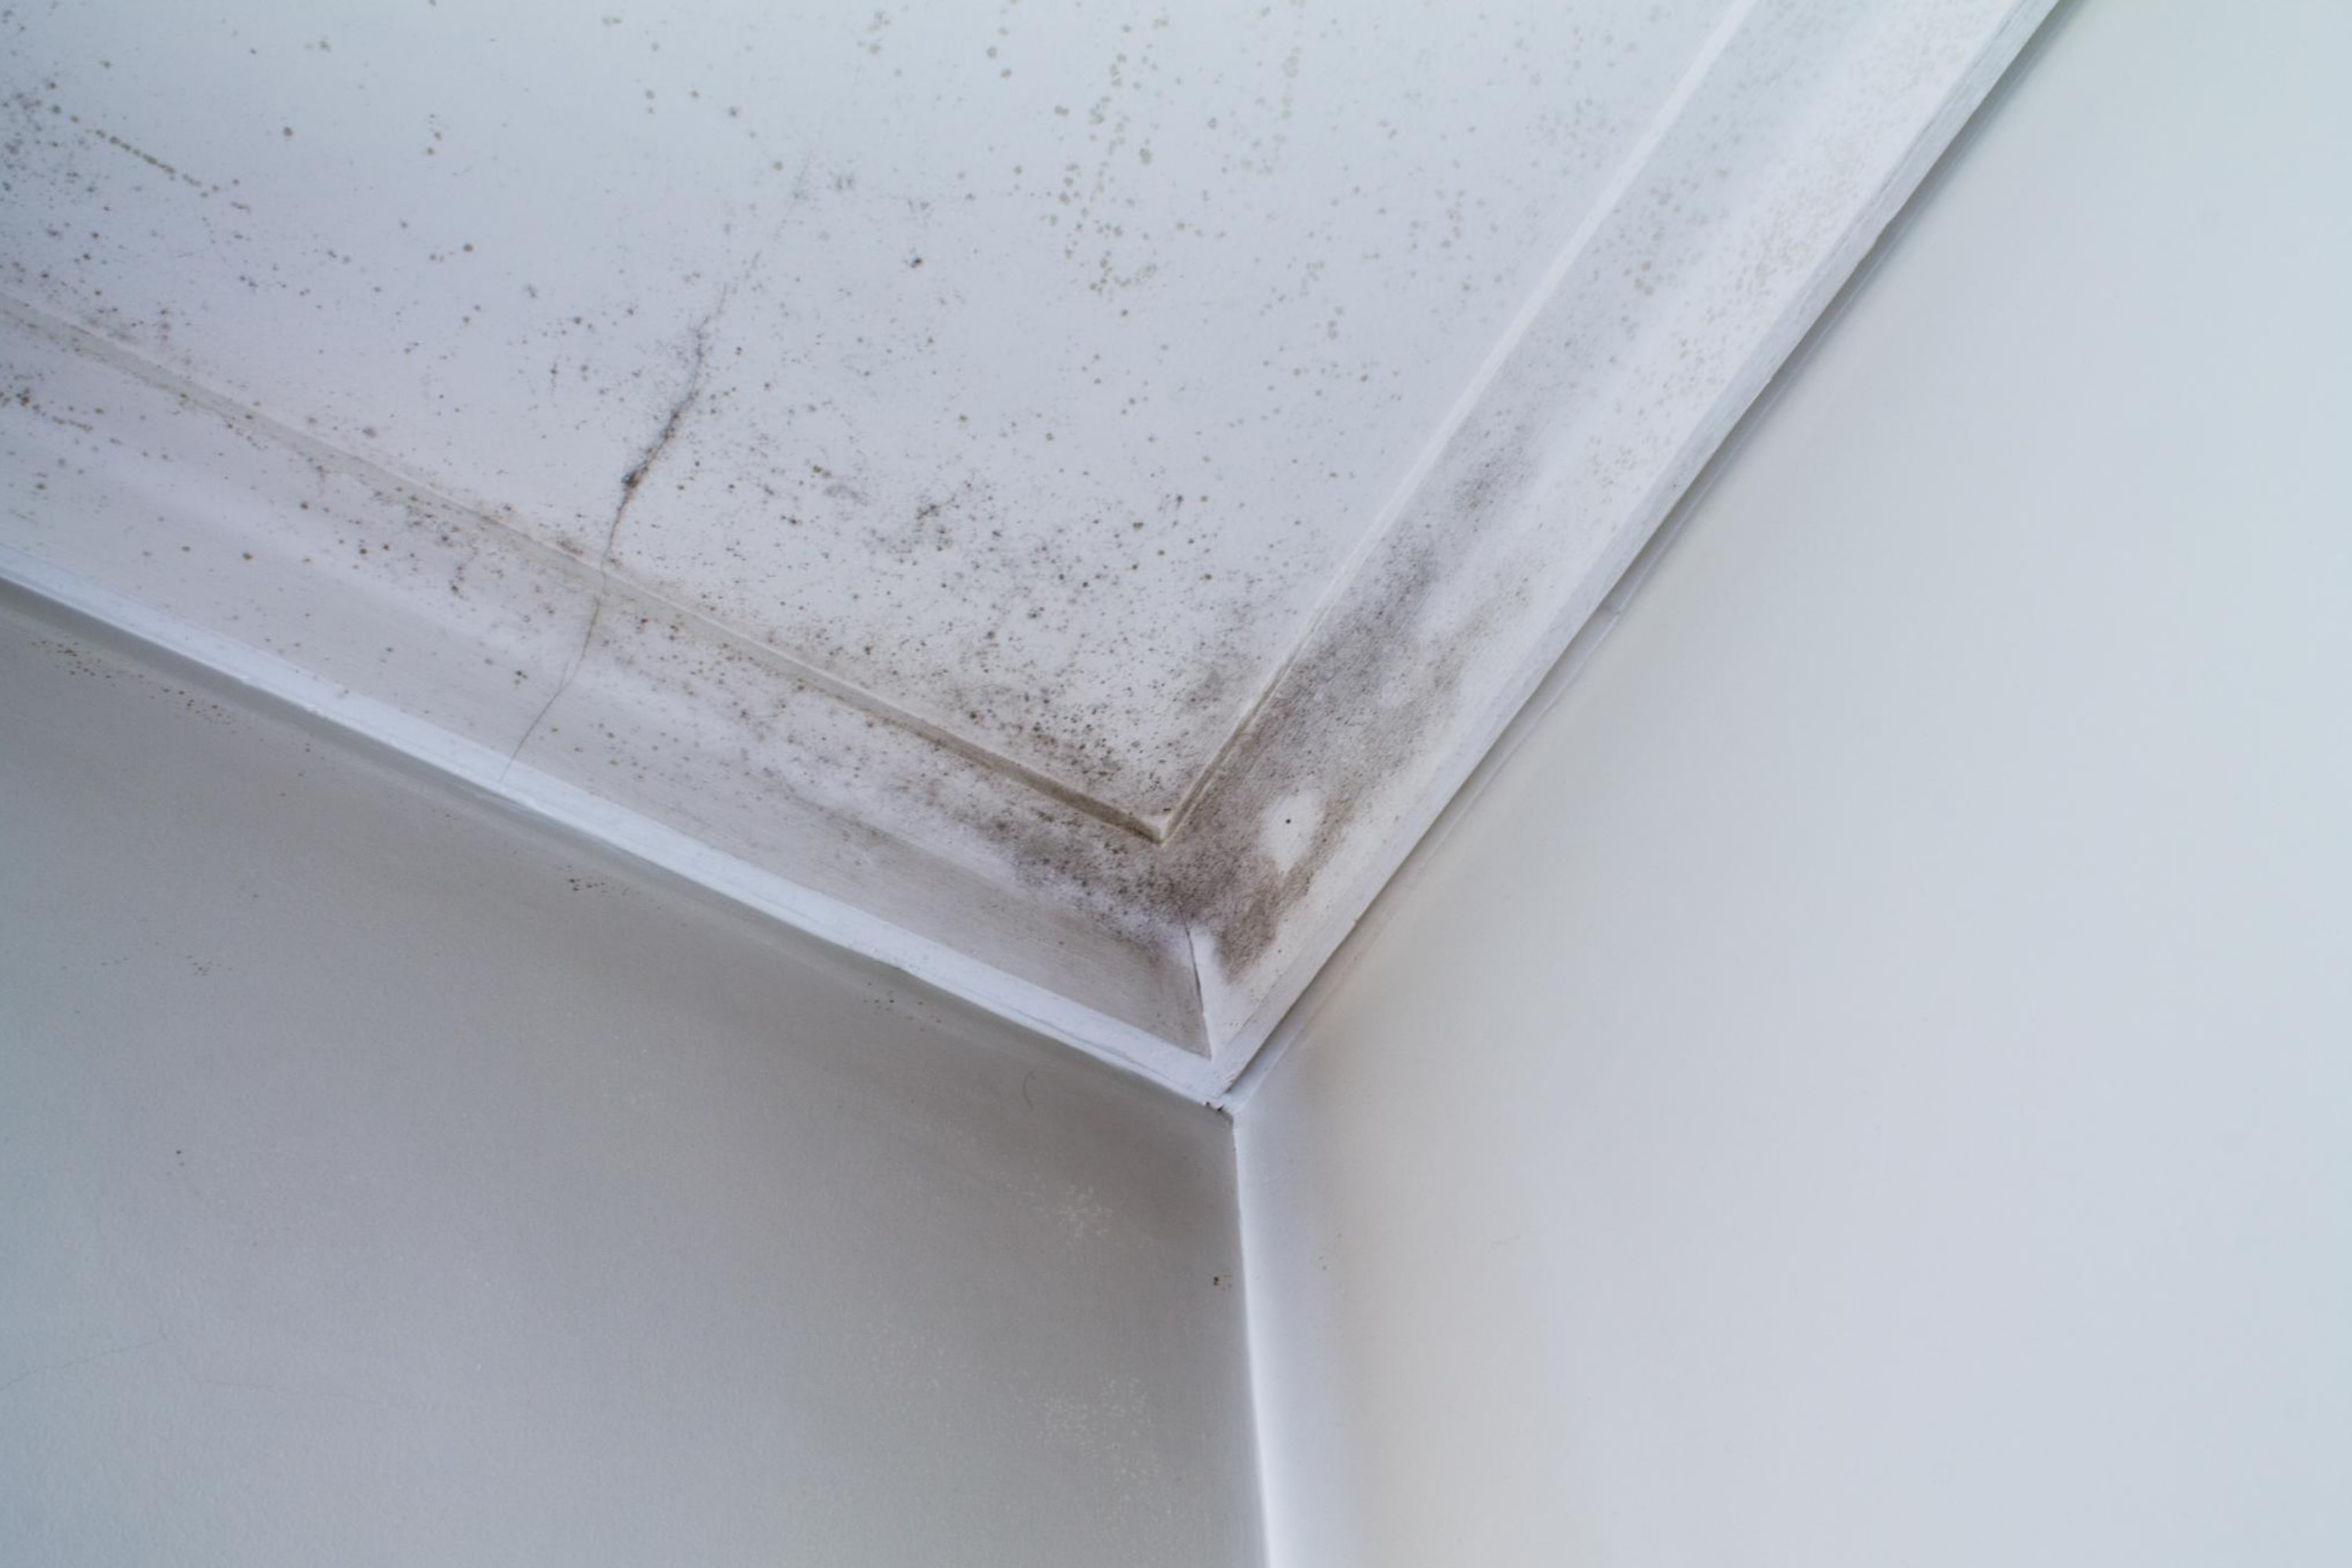 How to Keep a Basement Dry And Mold Free